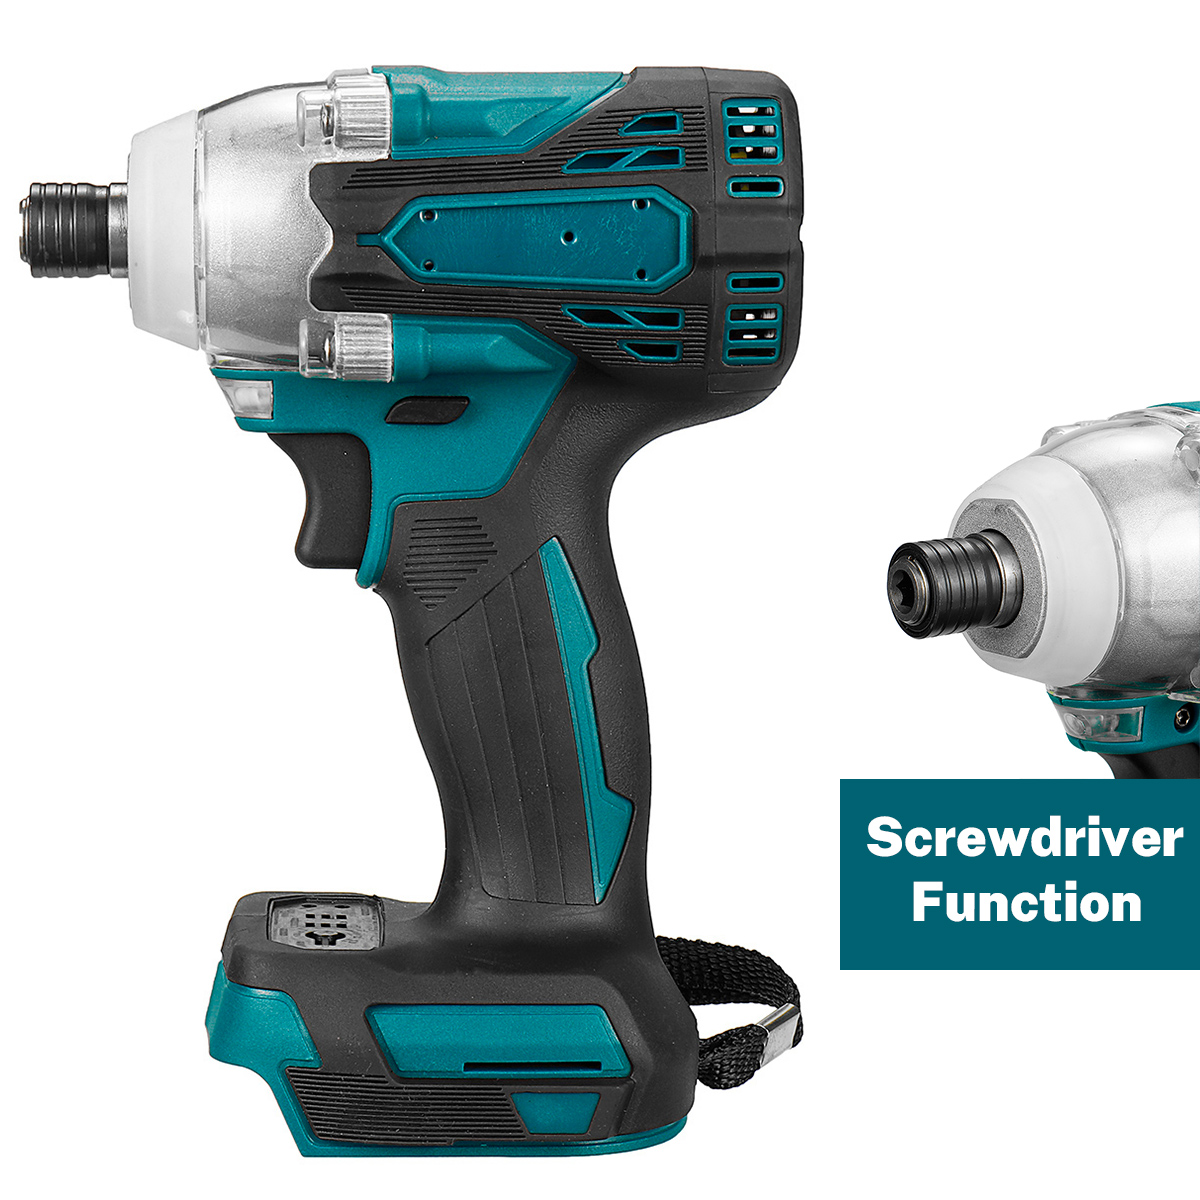 125mm-Cordless-Brushless-Impact-Wrench-Drill-Drive-Screwdriver-Power-Tool-For-Makita-18V-battery-1855969-6